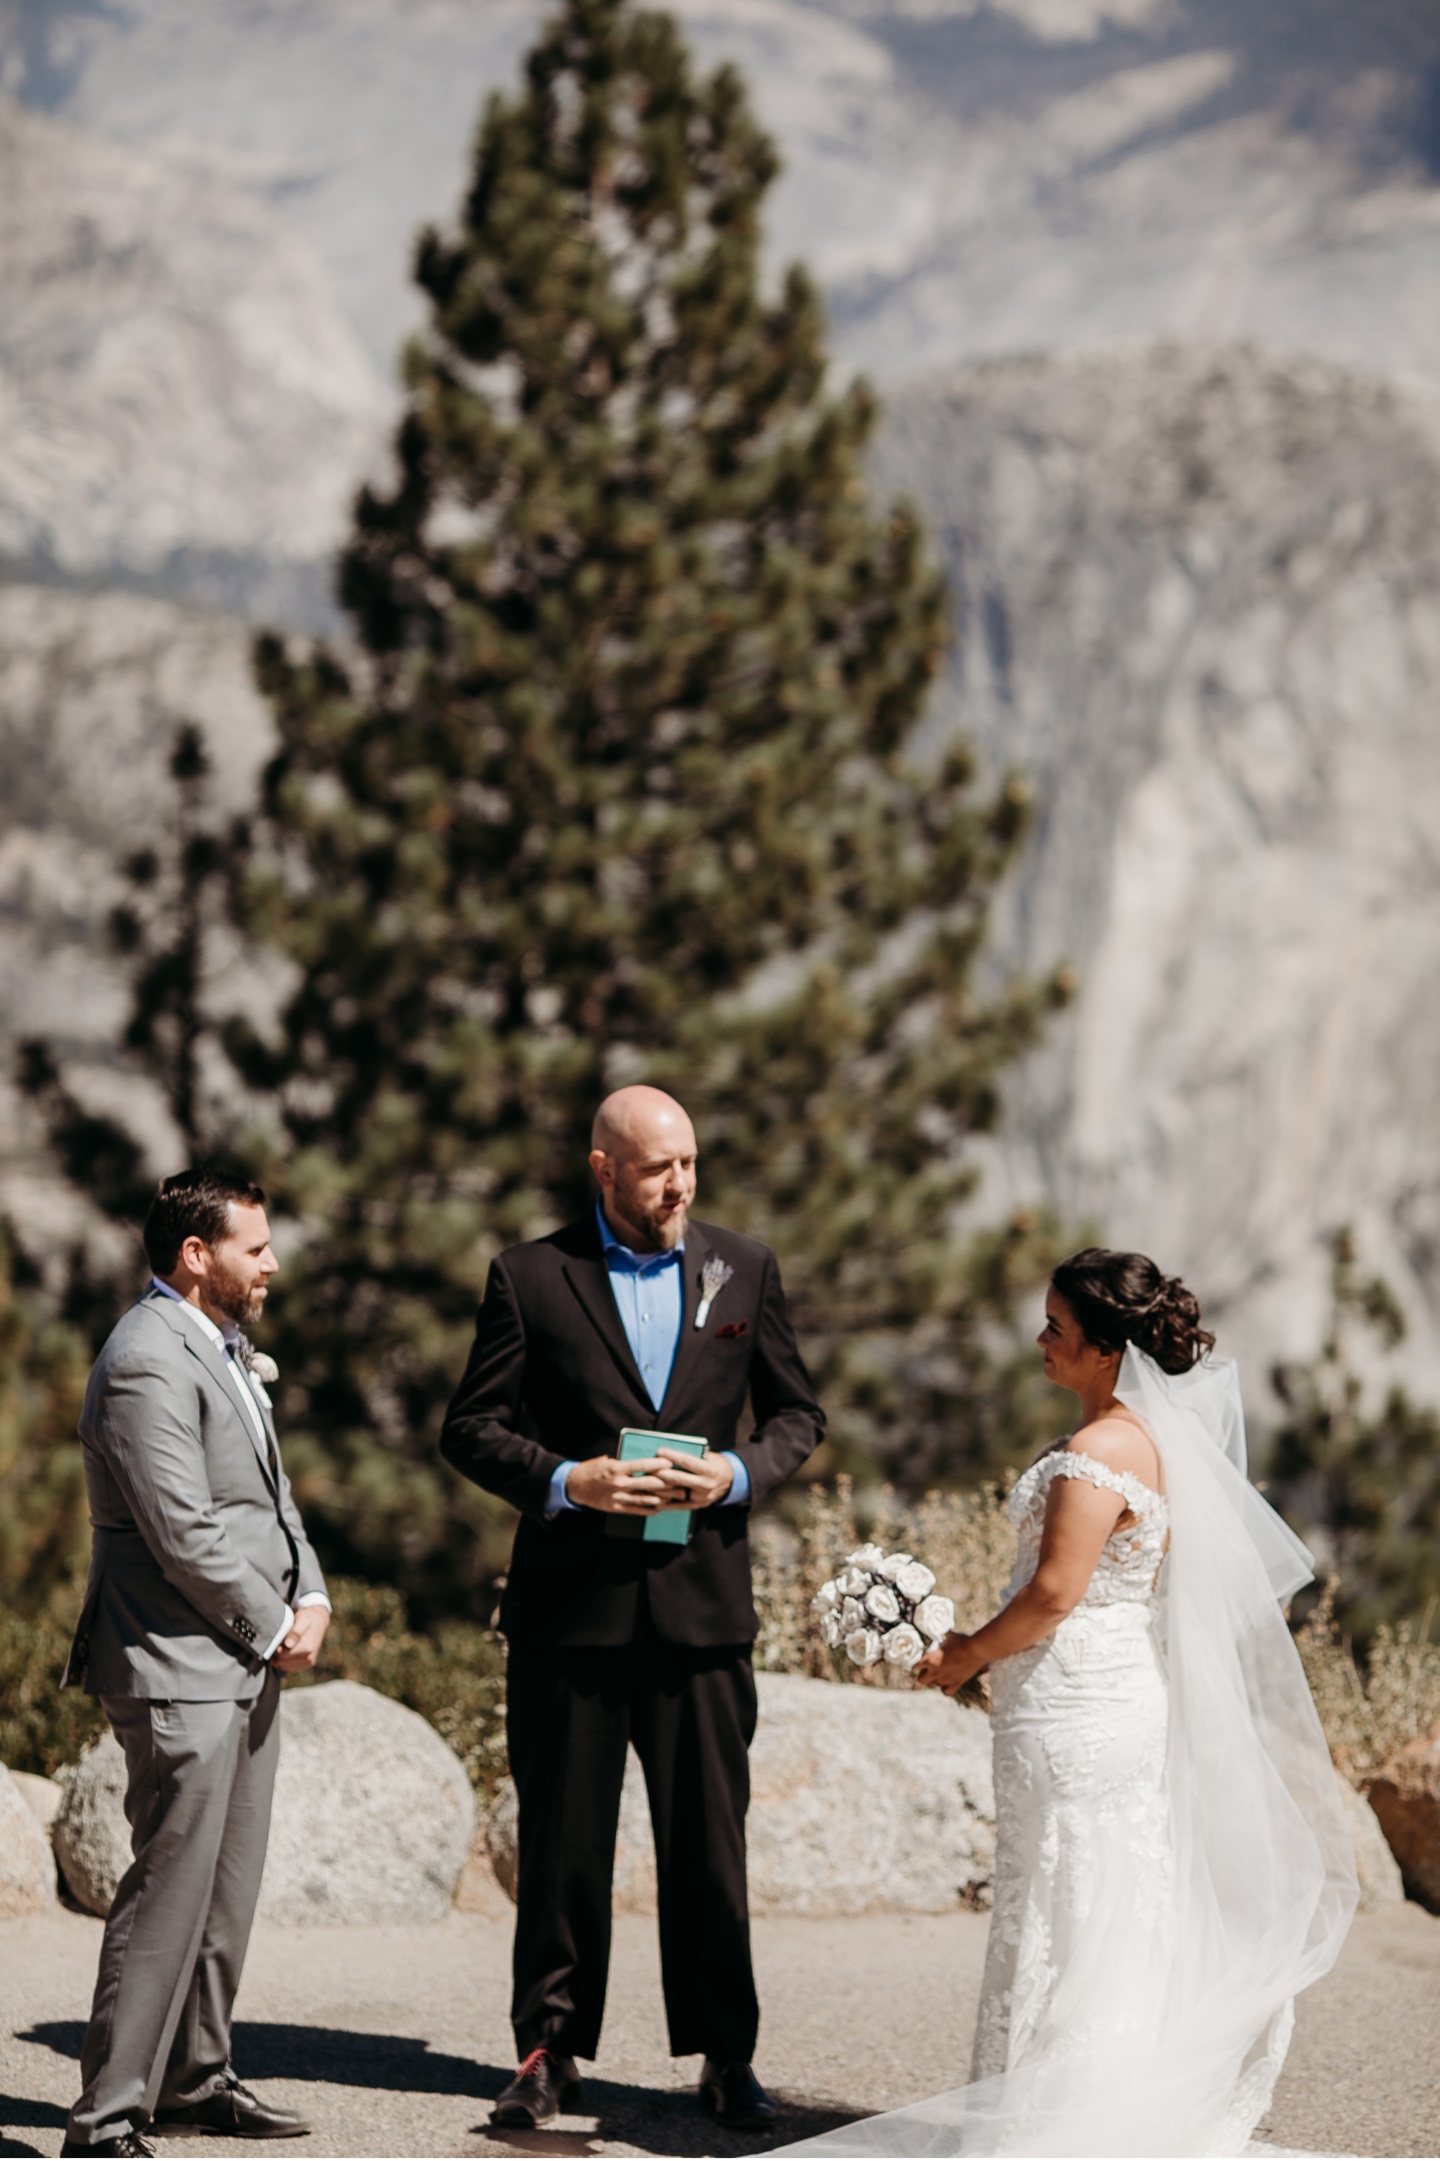 Bride and groom get married at Glacier Point in Yosemite National Park